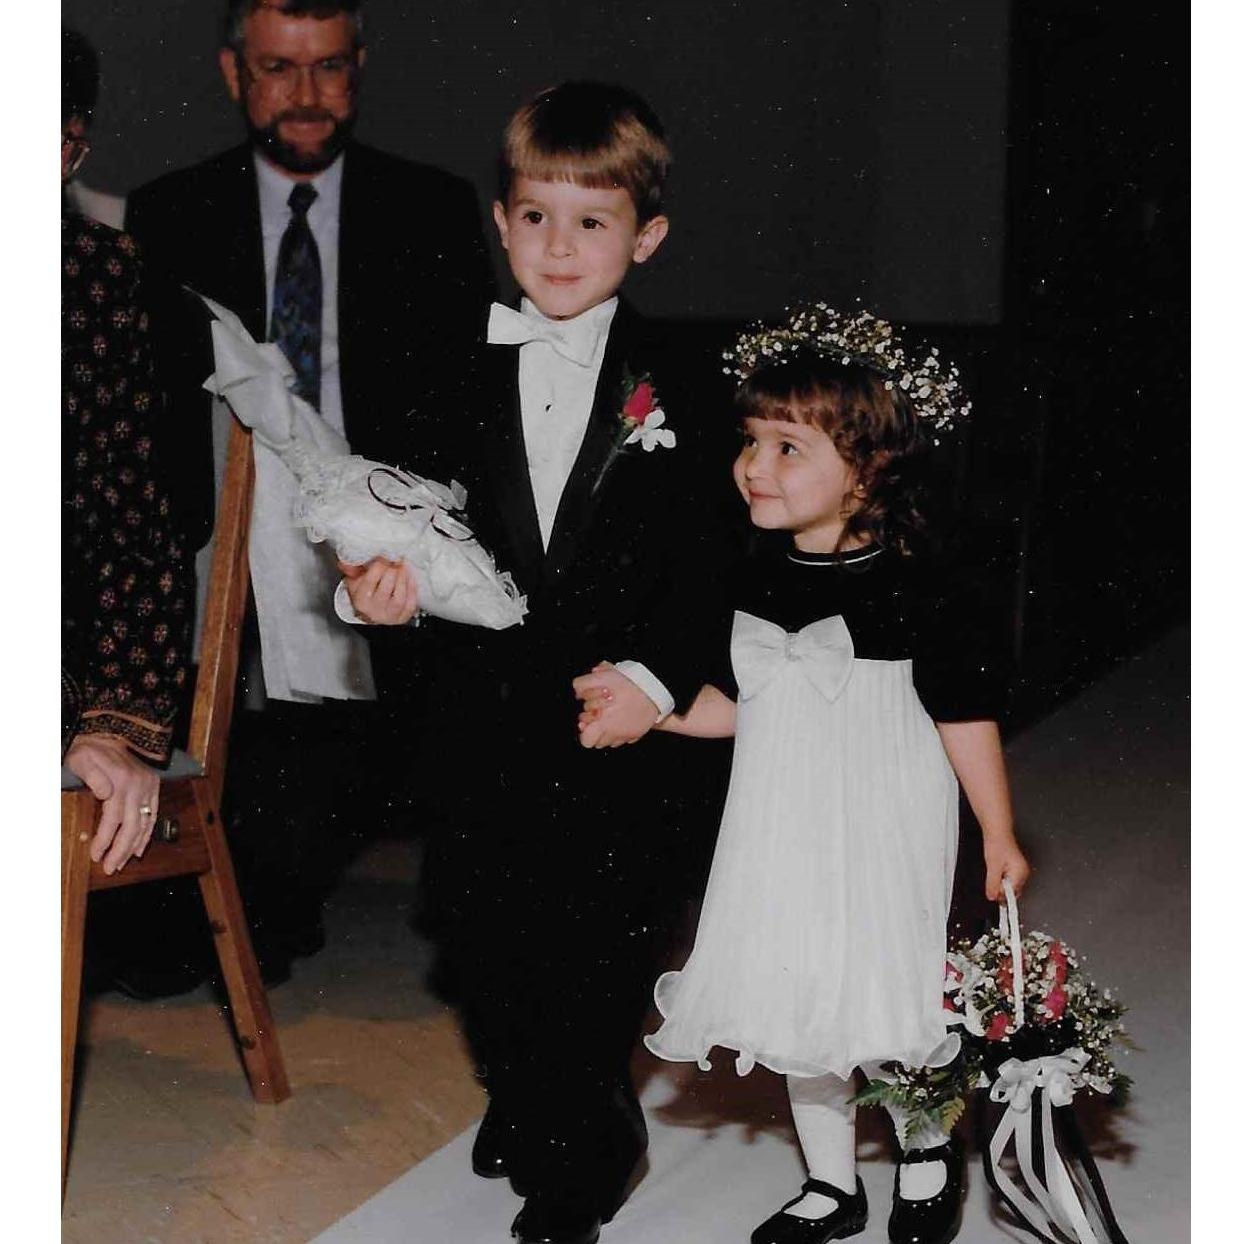 Nick and Maddie - flower girl and ring bearer (1997)